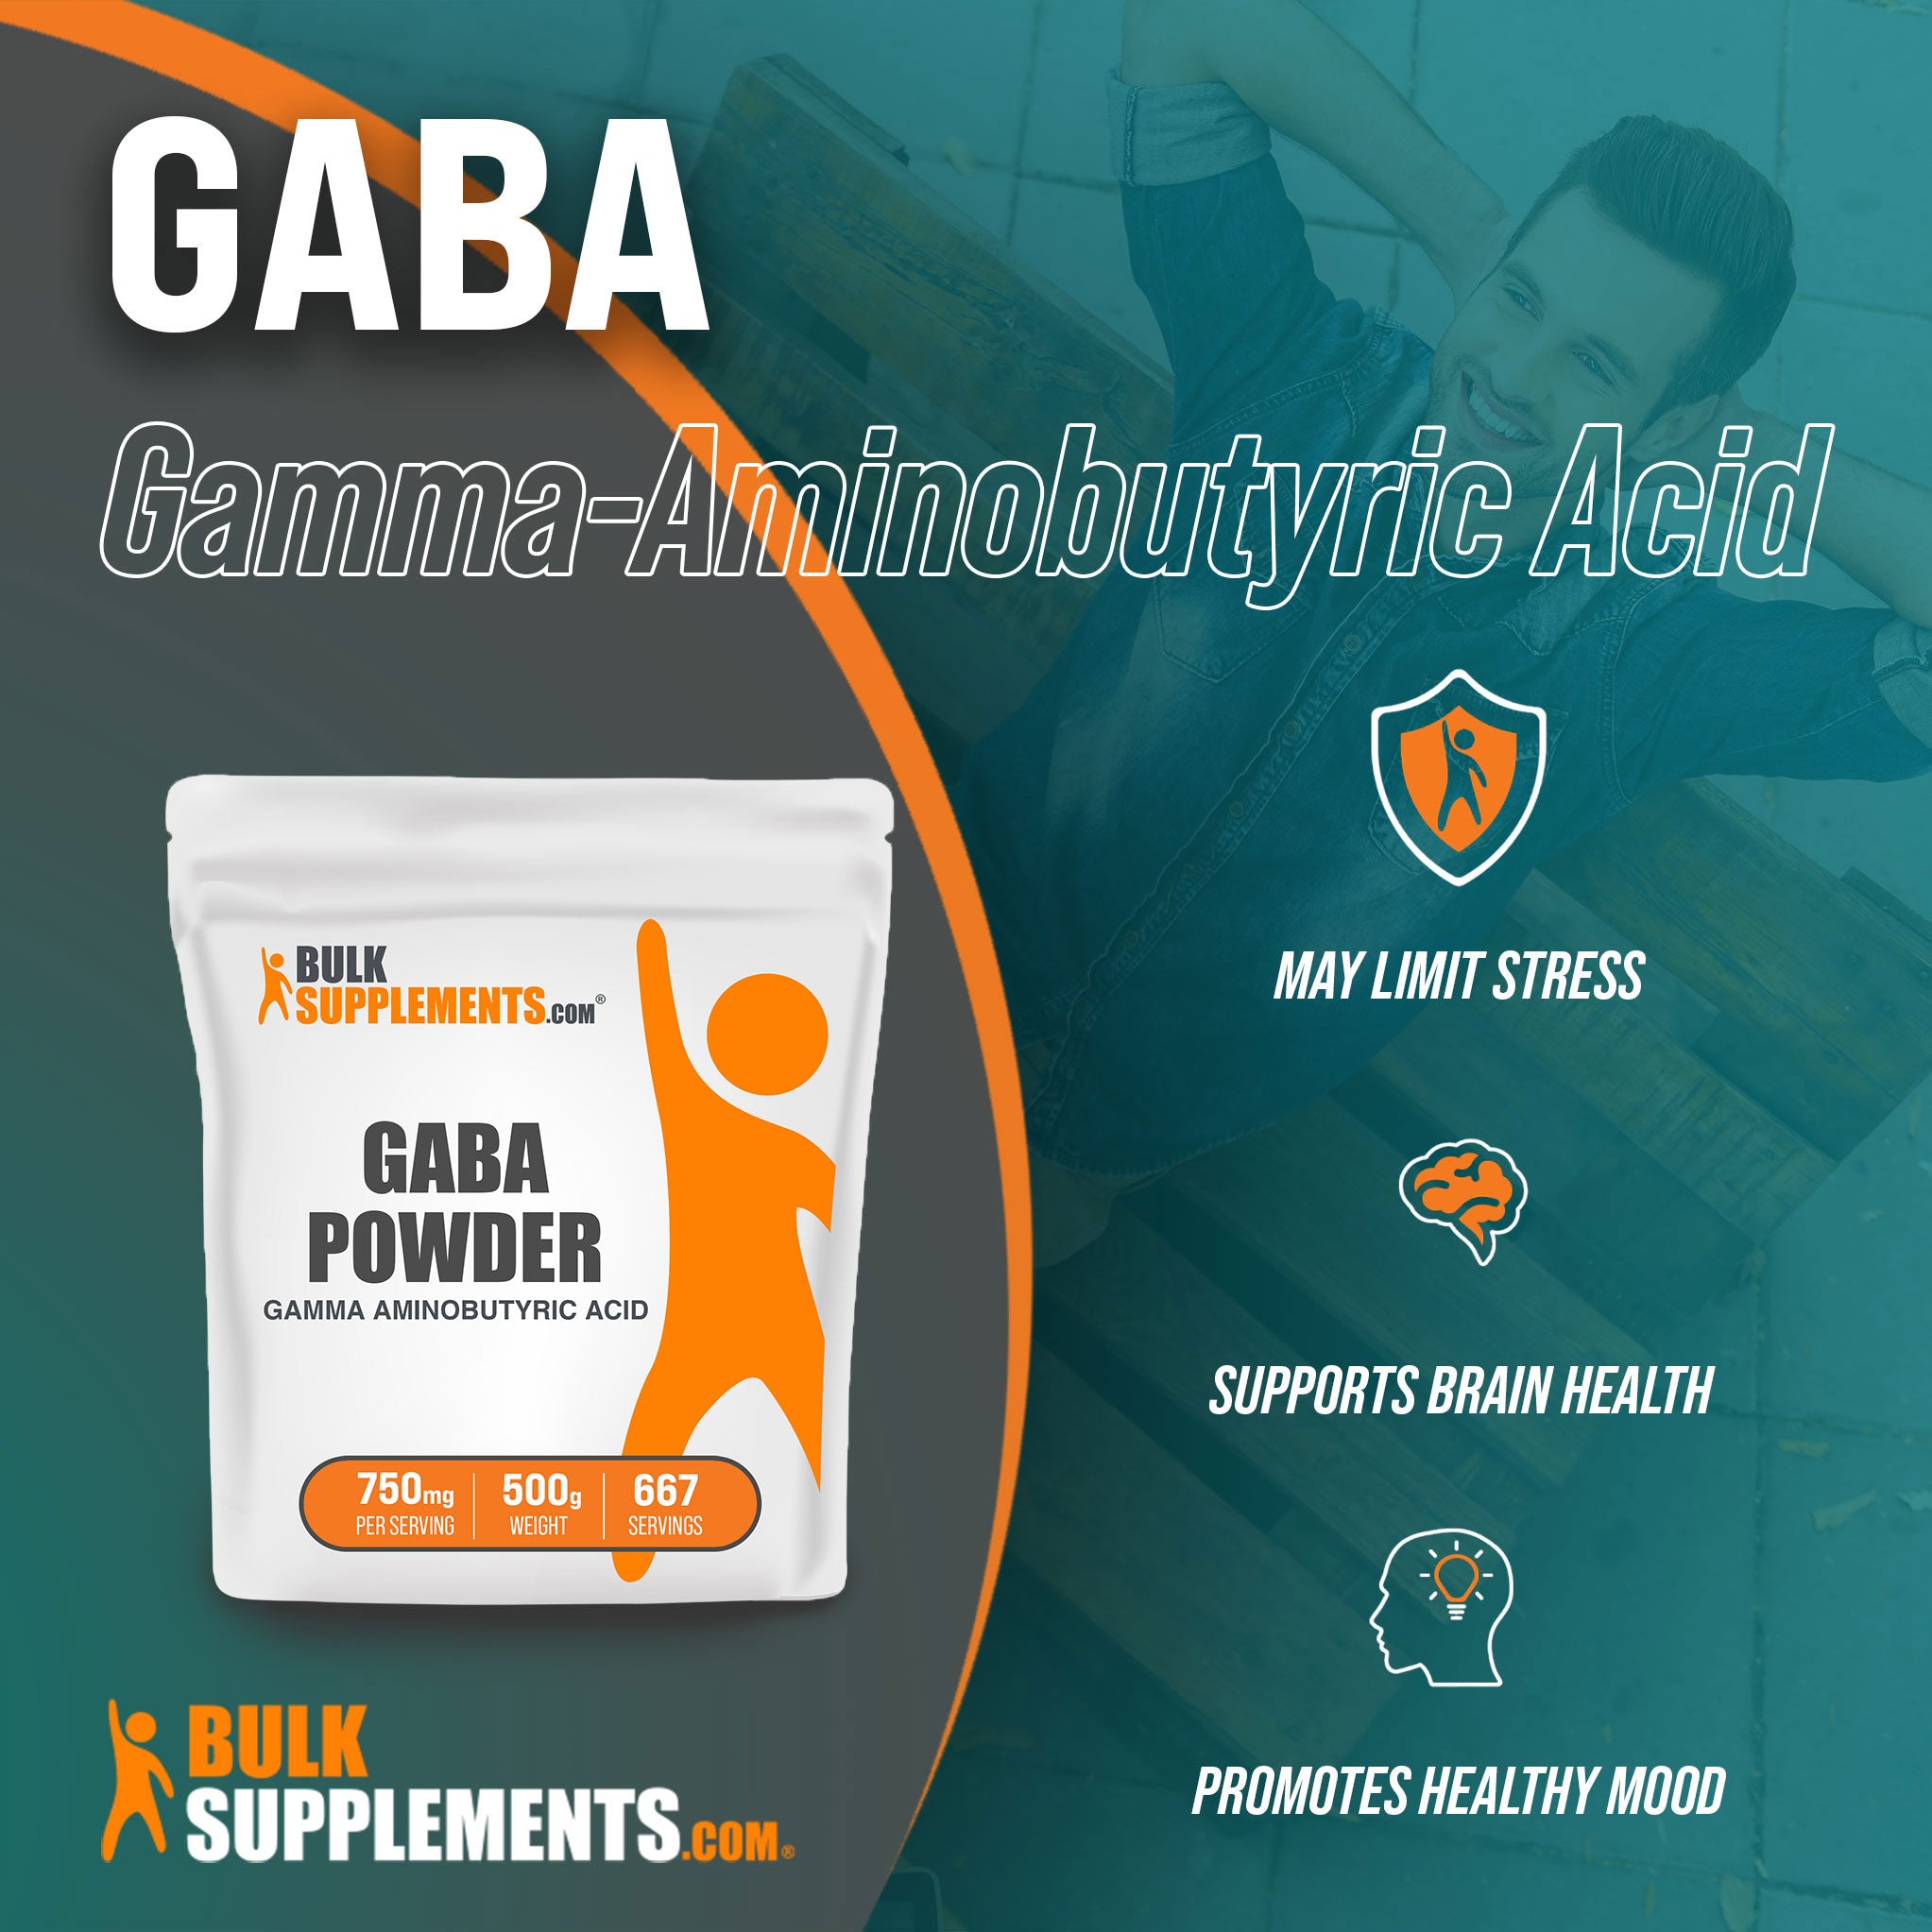 Benefits of GABA; may limit stress, supports brain health, promotes healthy mood